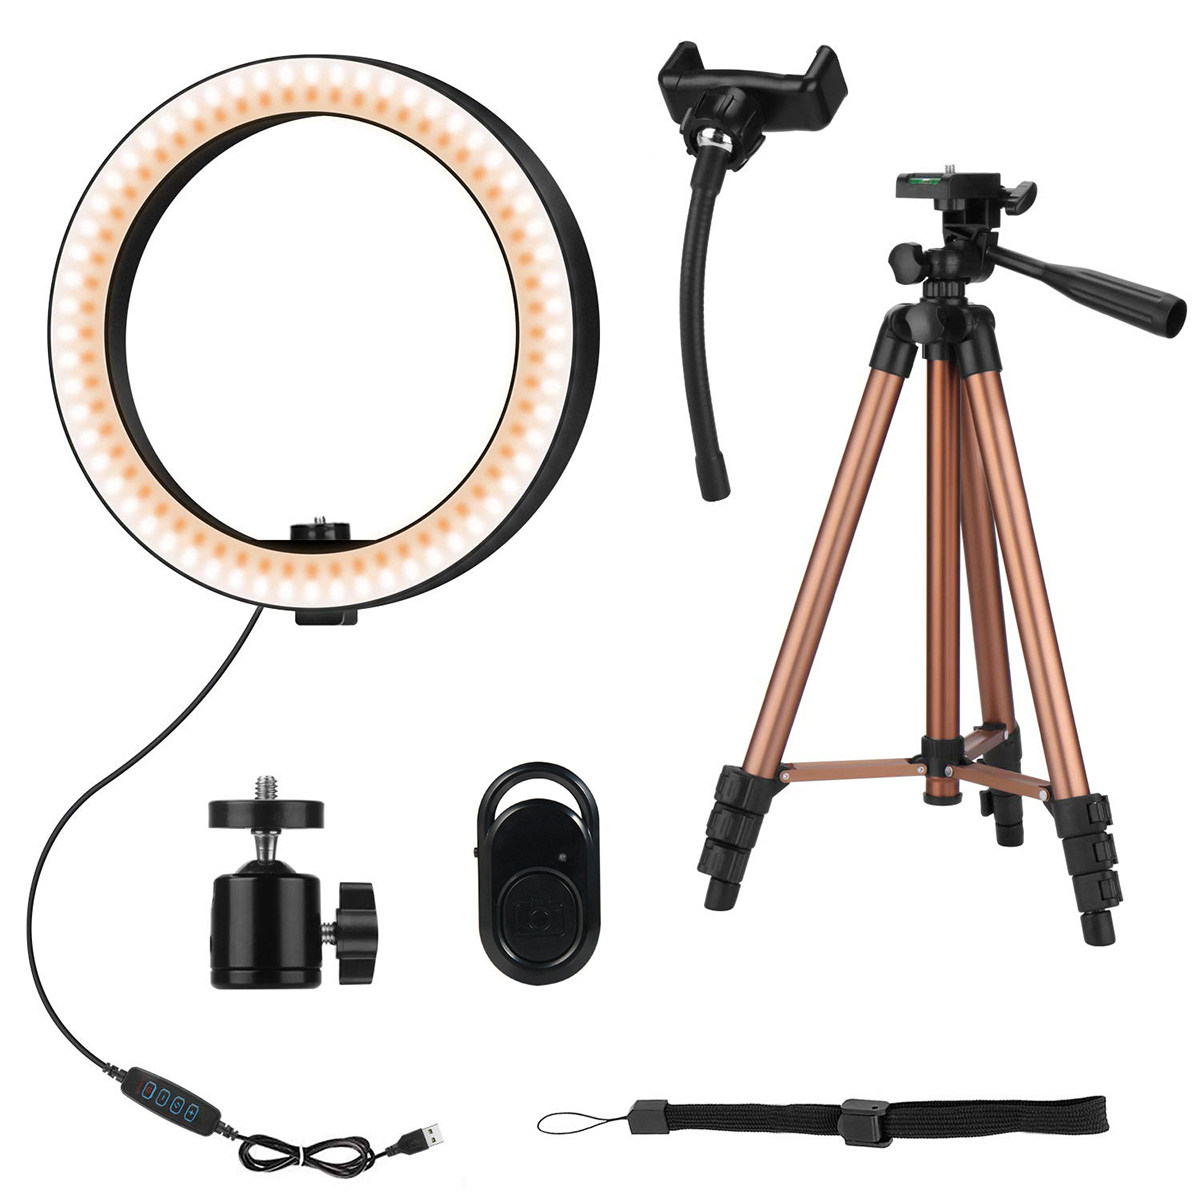 Controllable 6 inch 10 inch LED Selfie Ring Light + Tripod Stand + Phone Holder Photography YouTube Video Makeup Live Stream with Remote Shutter for iPhone Android Smart Phones